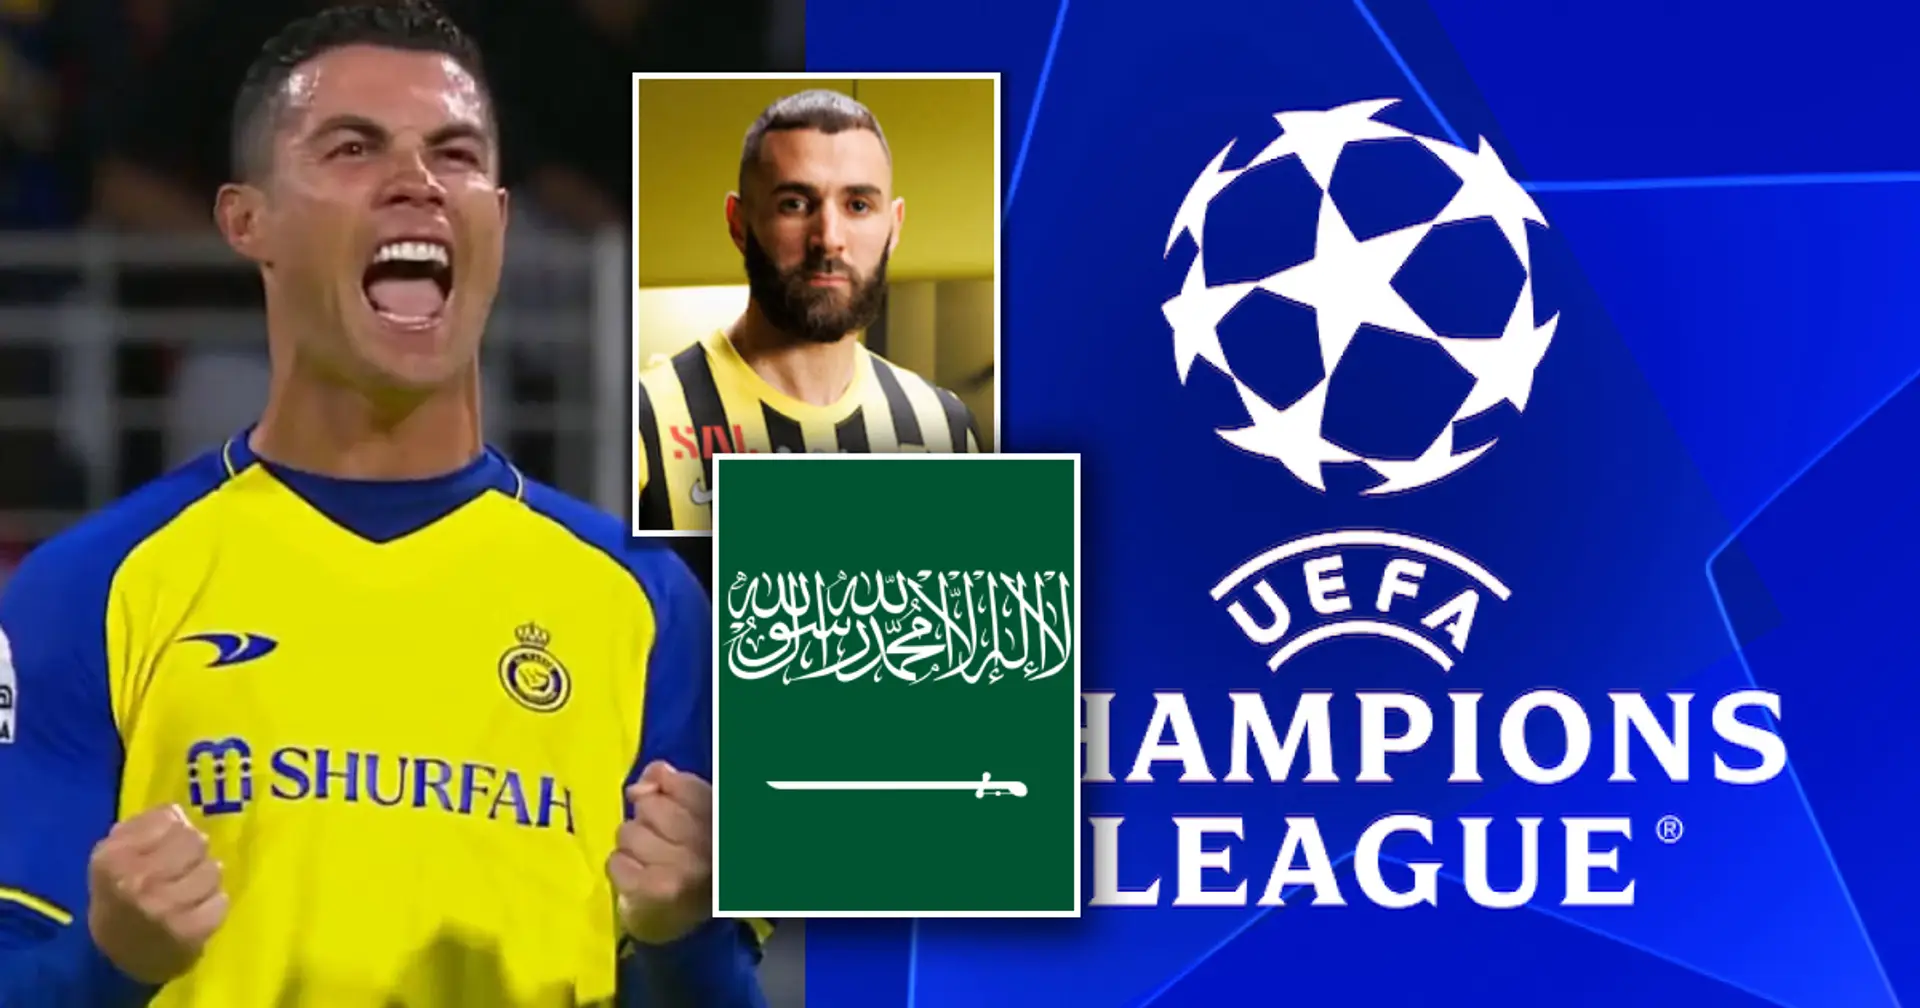 Saudi Arabia eyes Uefa Champions League spot, will do 'whatever it takes'  to attract more top players to domestic league